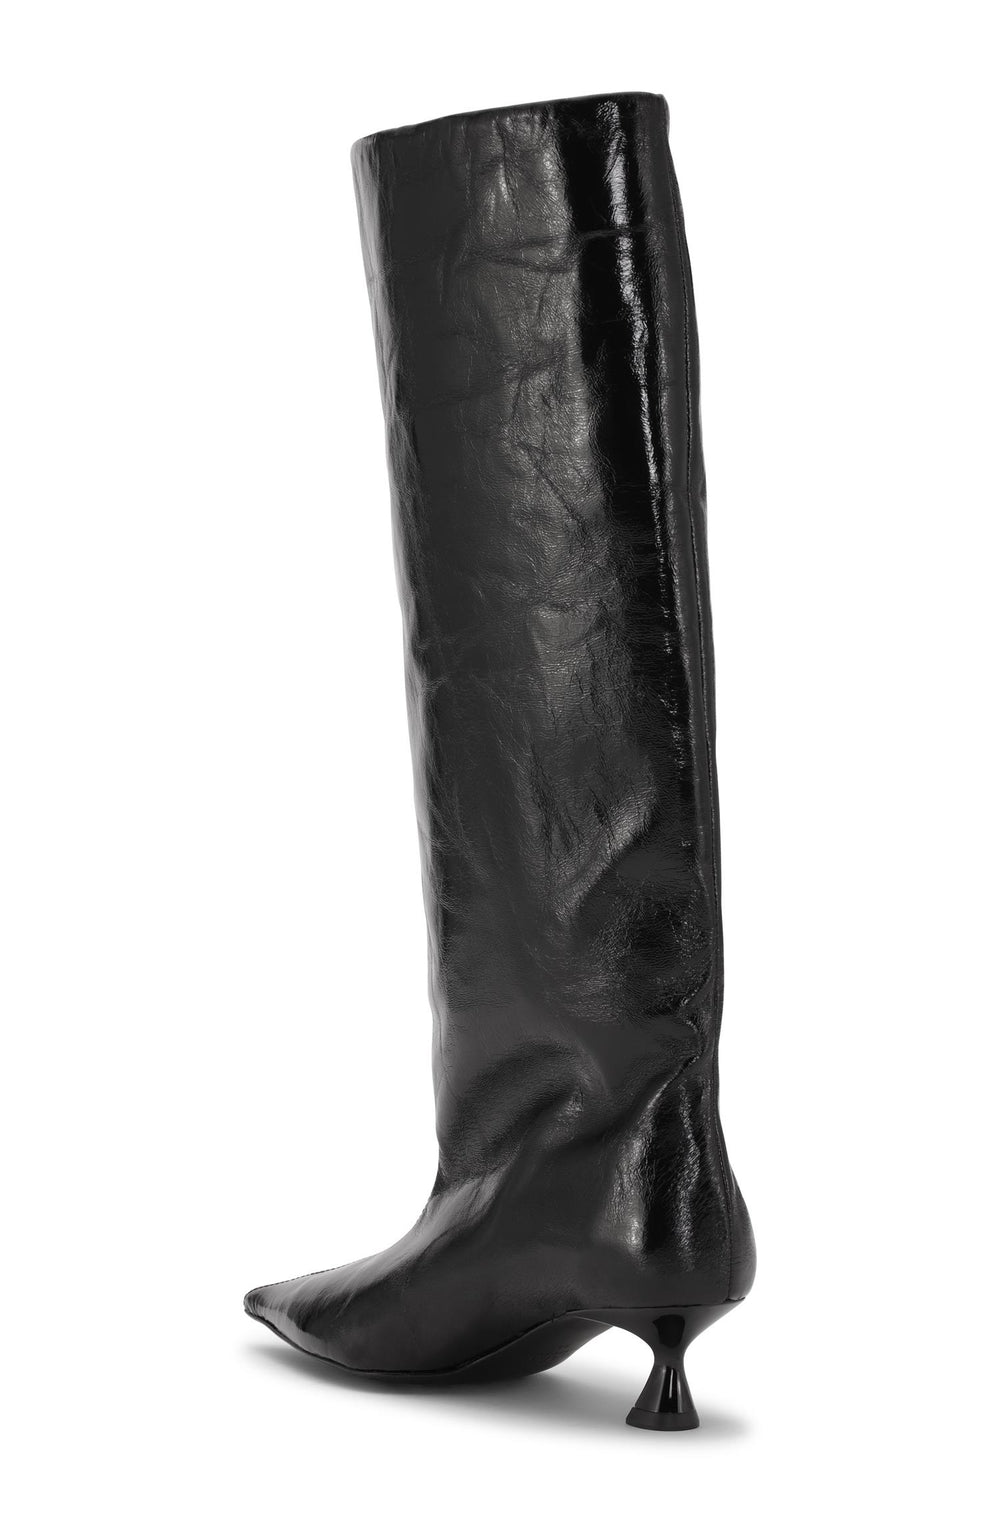 GANNI - Soft Slouchy High Shaft Boot Naplack - Dale